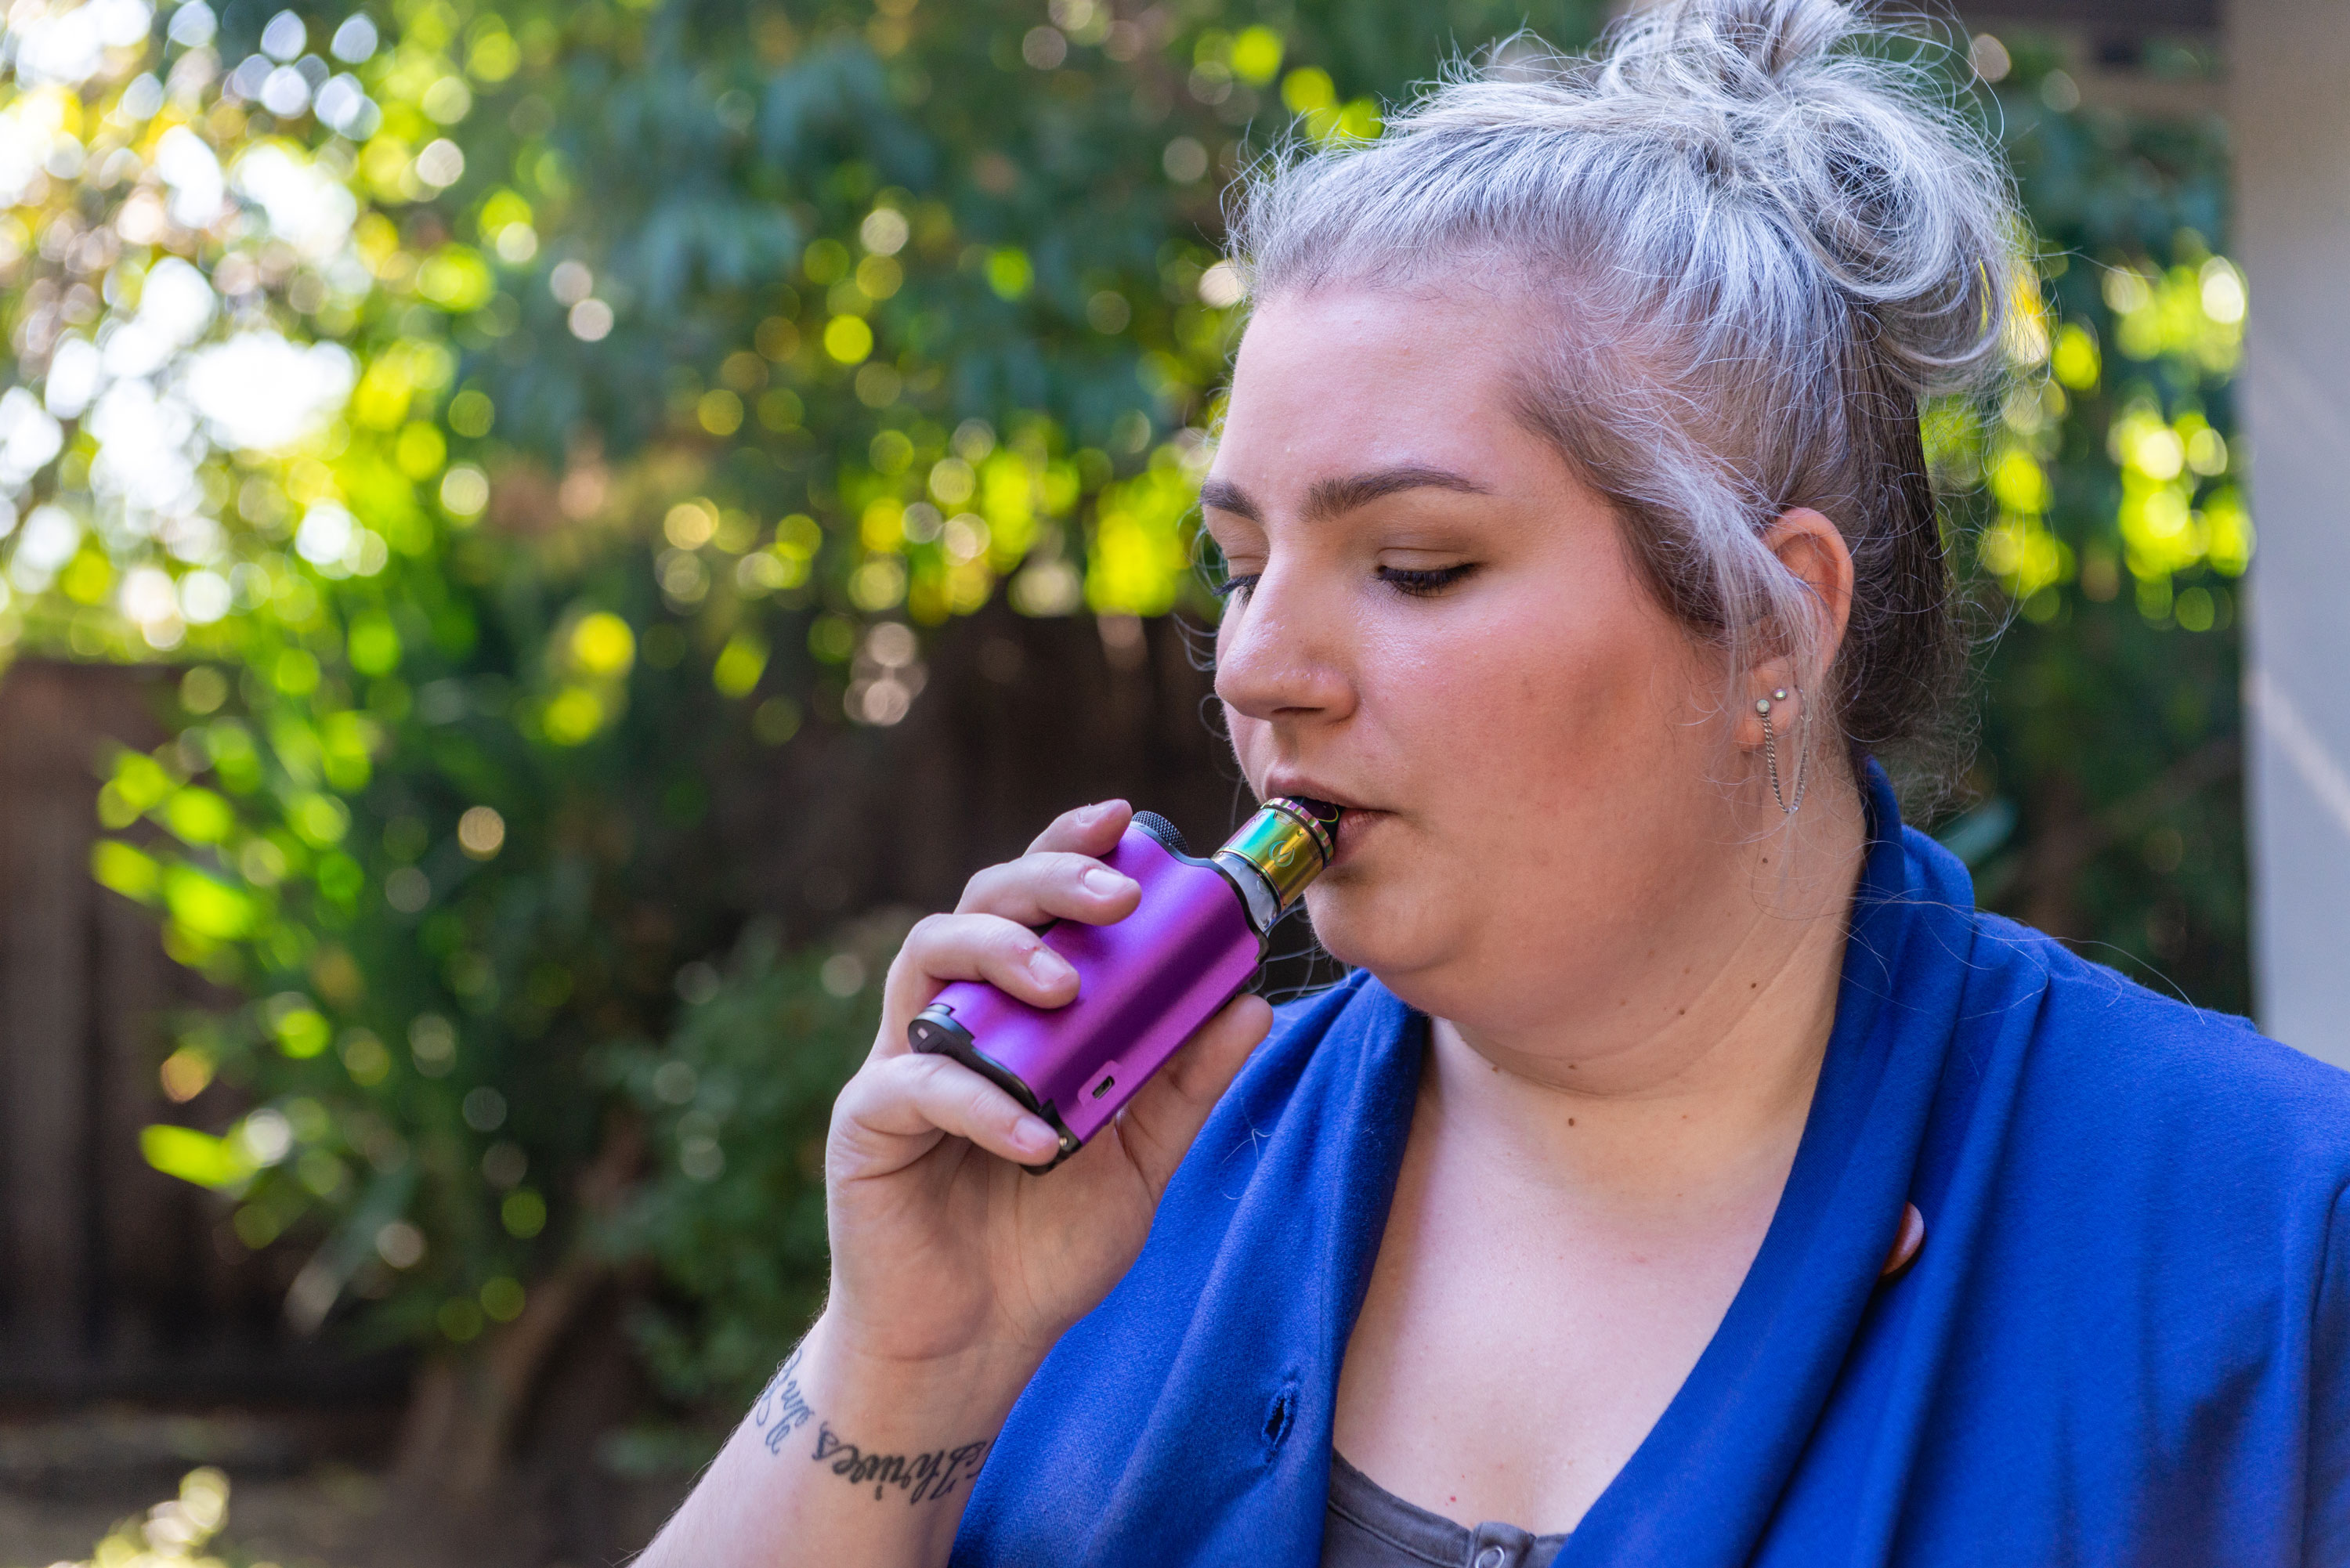 More Vapers Are Making Their Own Juice